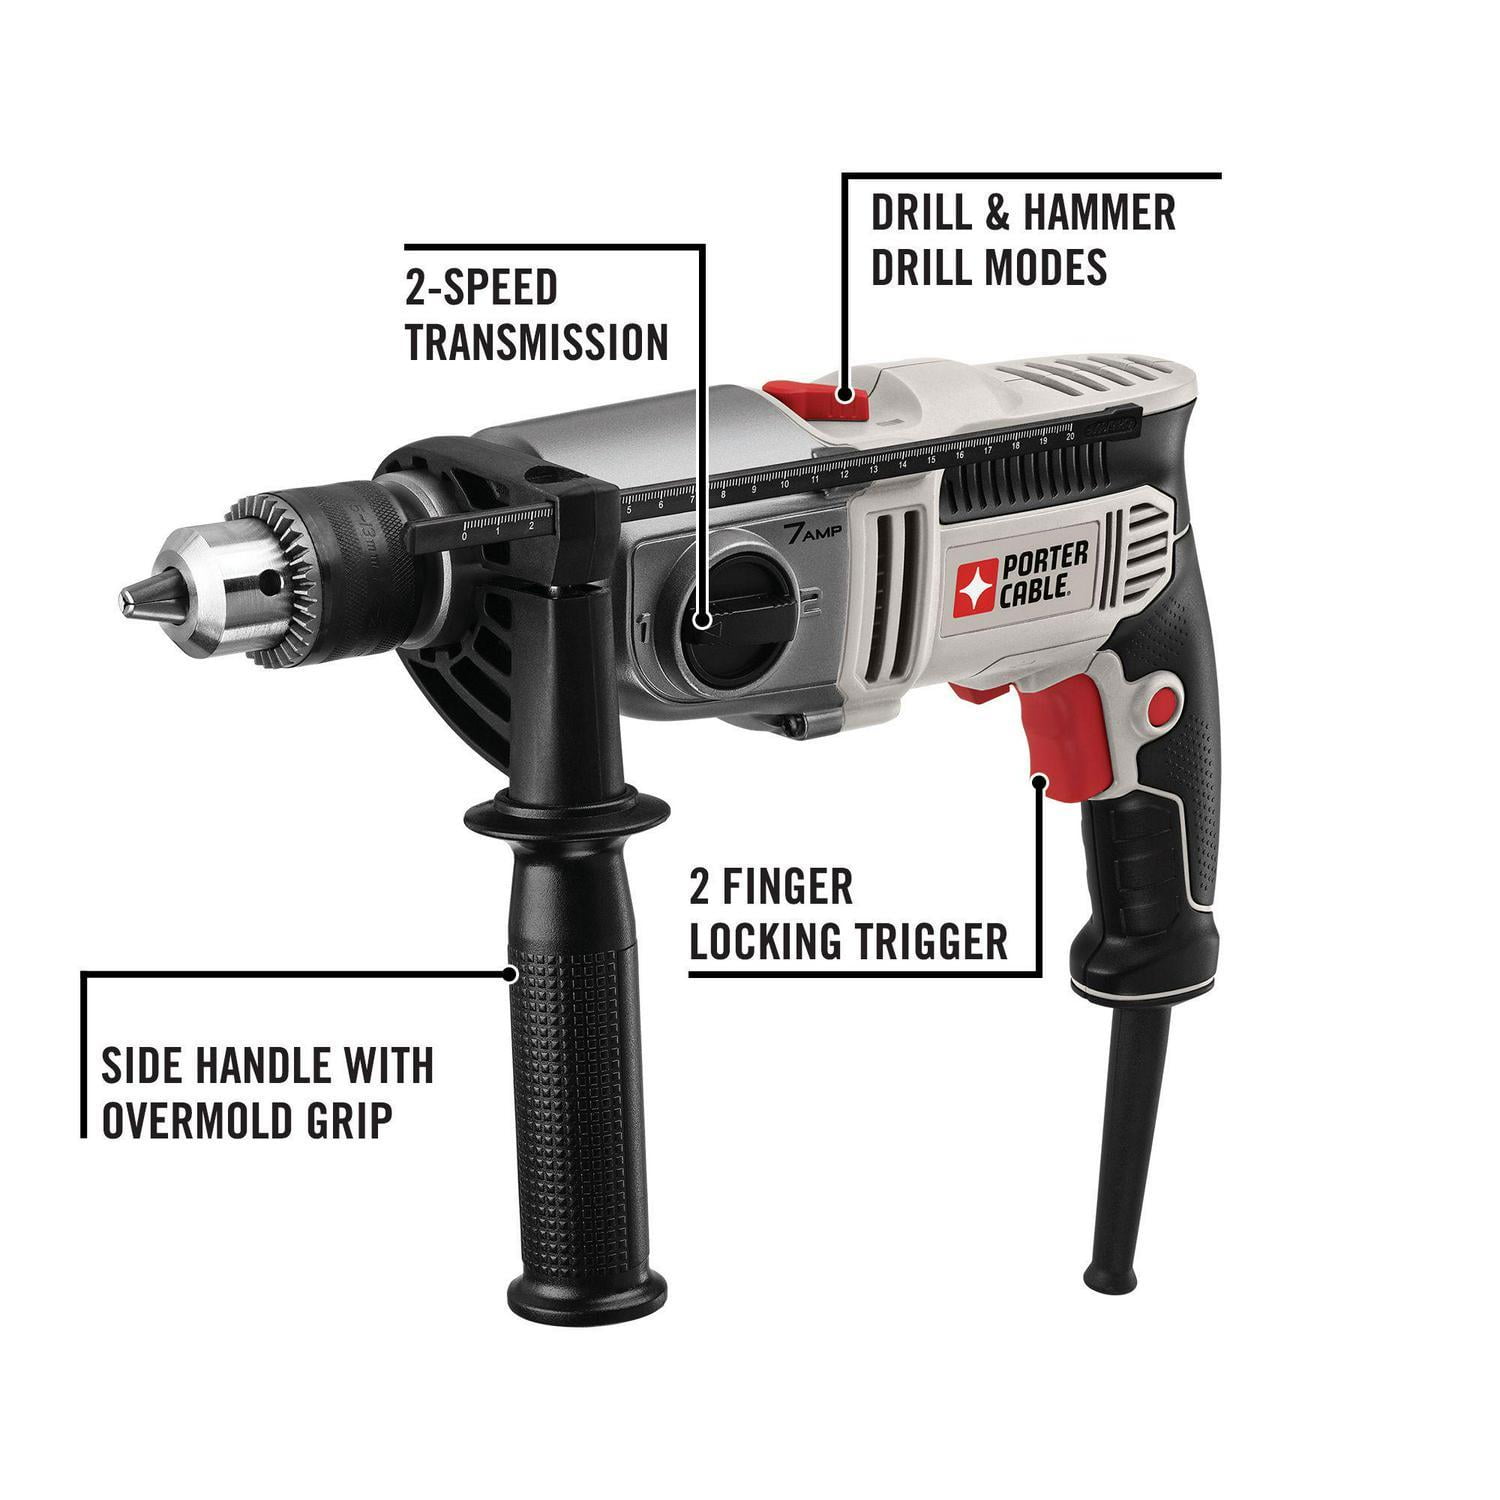 PORTER-CABLE 1/2 in VSR 2-Speed Hammer Drill